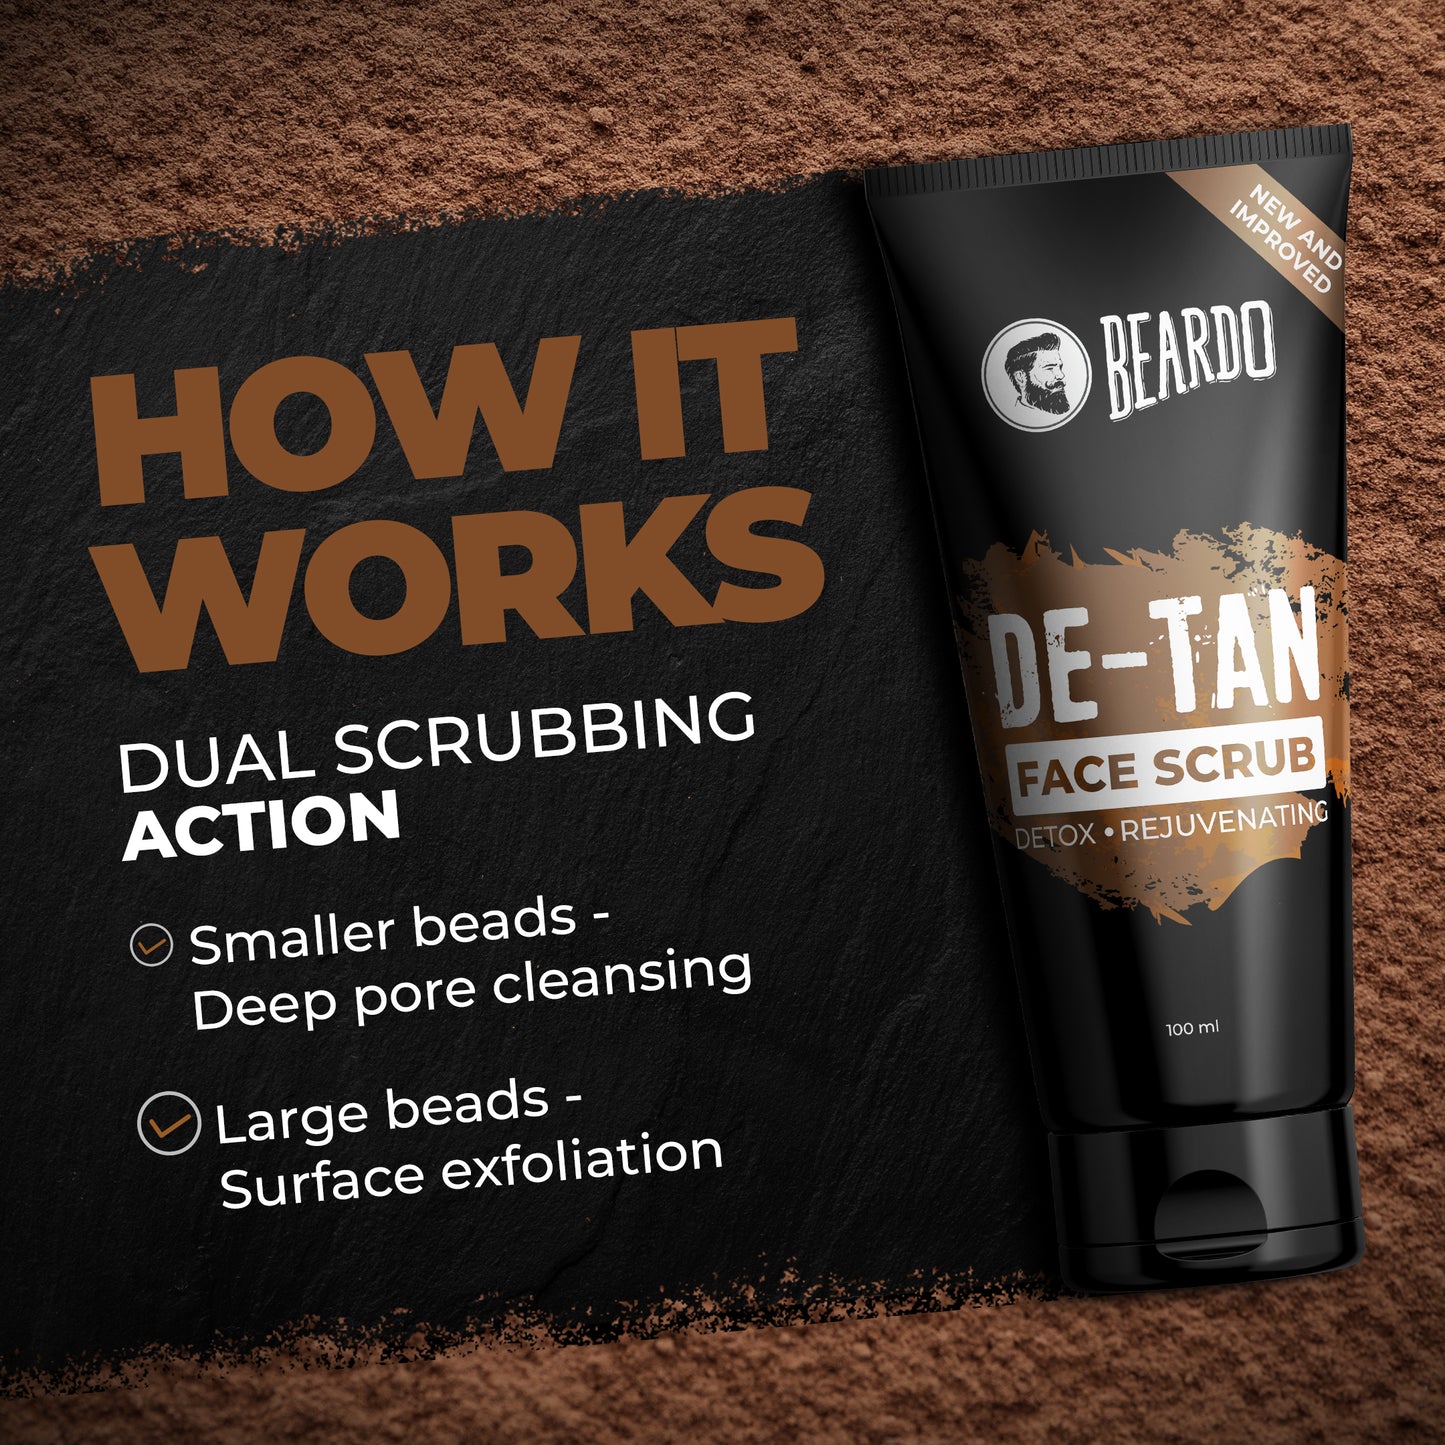 Can we use de tan face scrub daily, Does Beardo de Tan face wash work, Which is the best tan removal scrub, Can we use Detan scrub daily